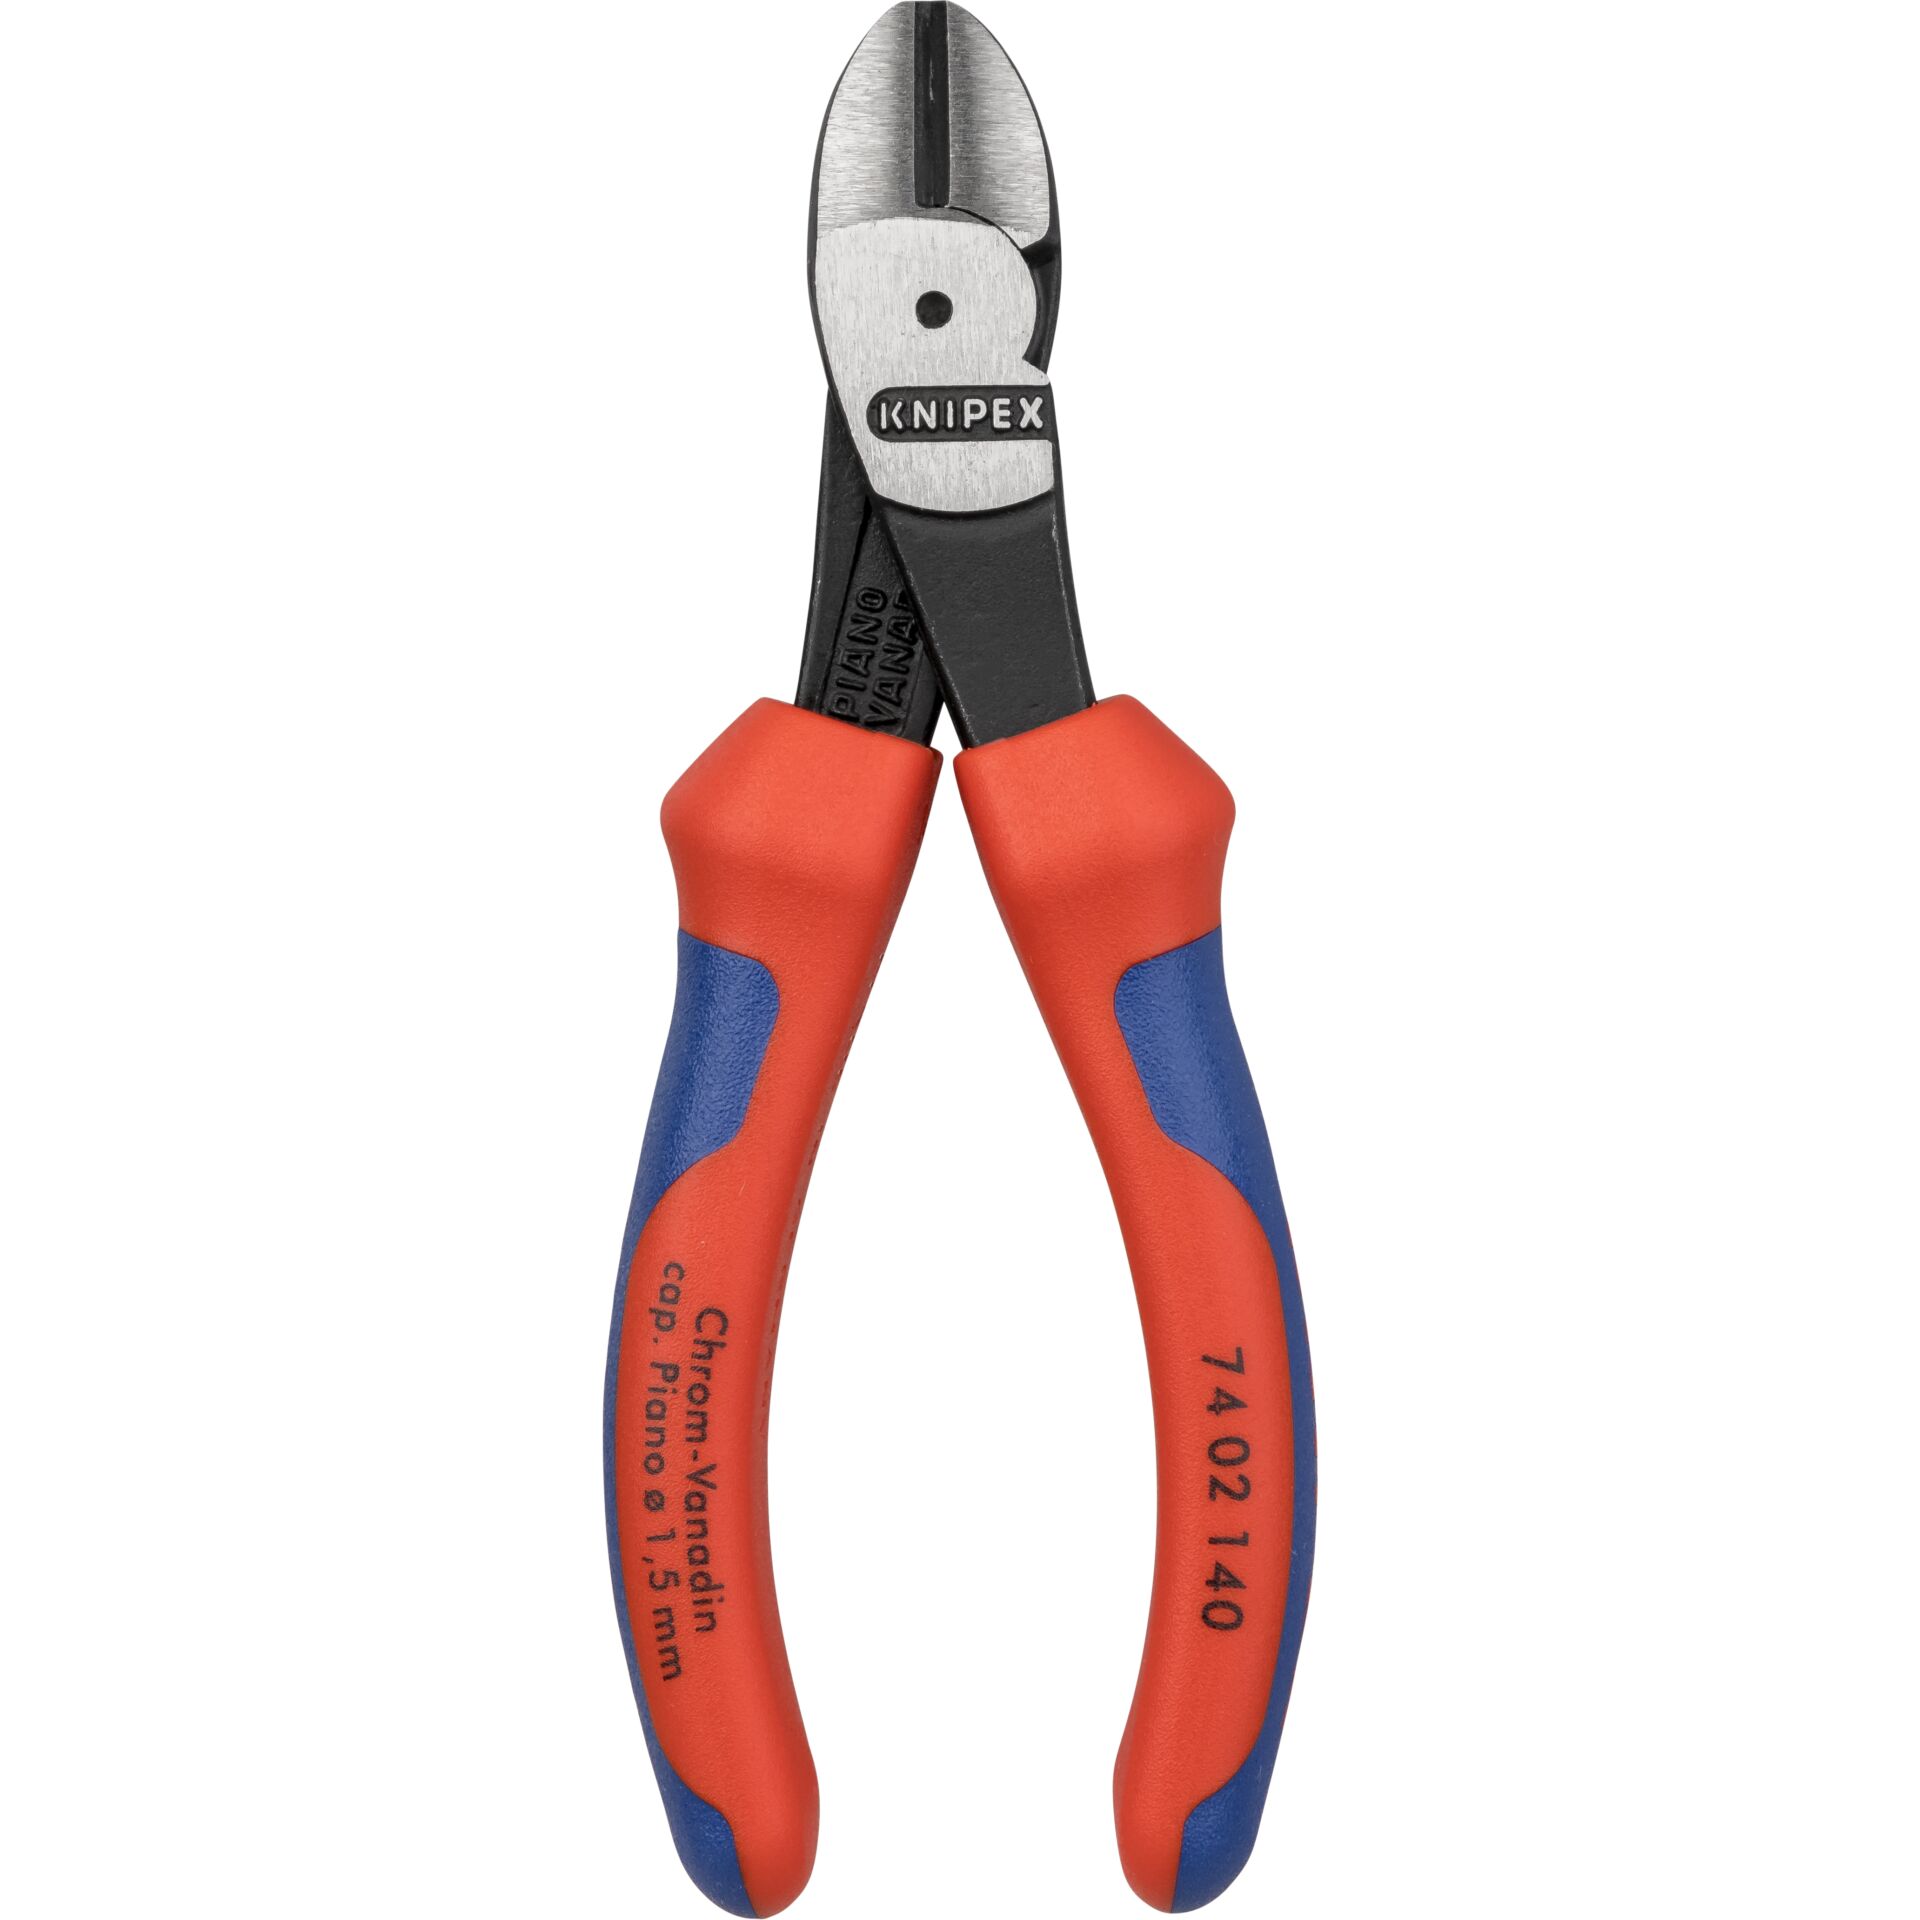 KNIPEX Kraft tronchese laterale